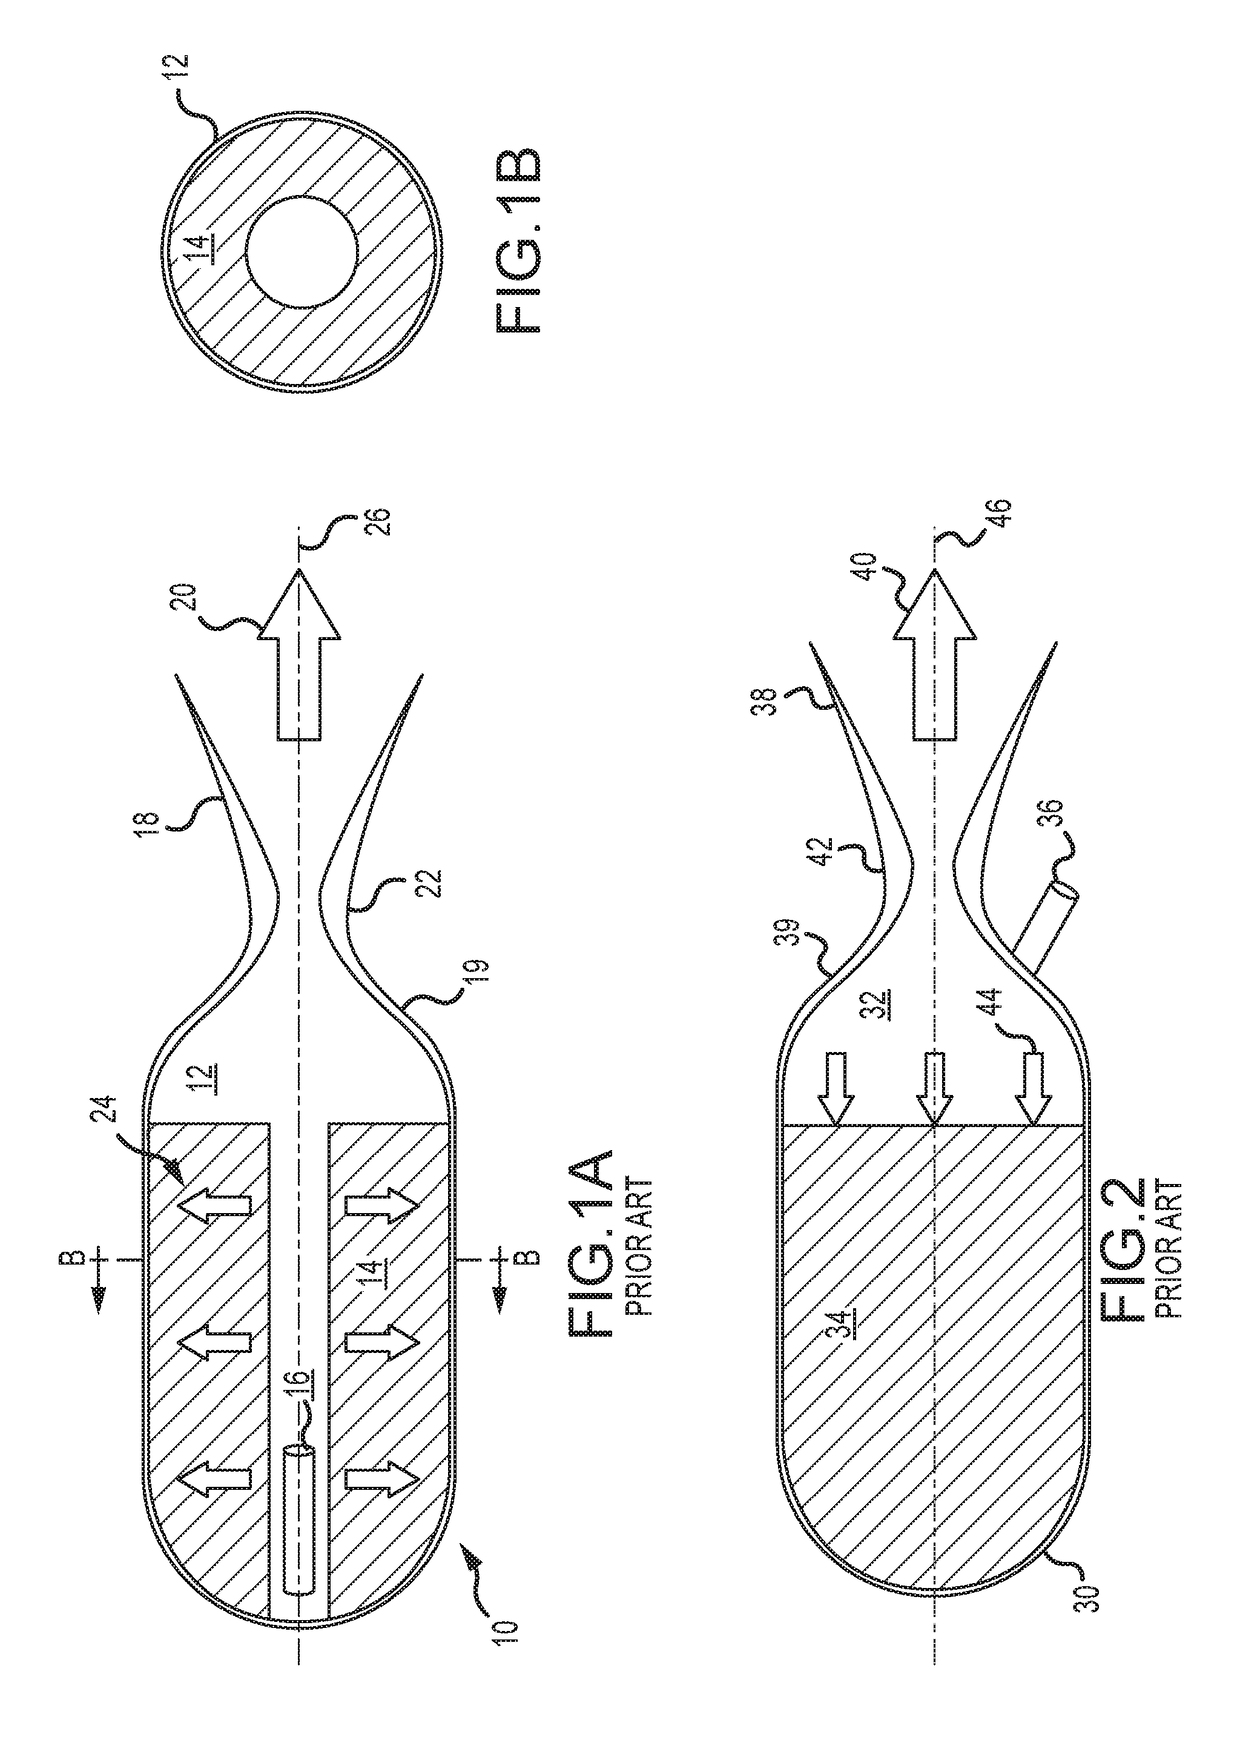 Electrically operated propellant for solid rocket motor thrust management